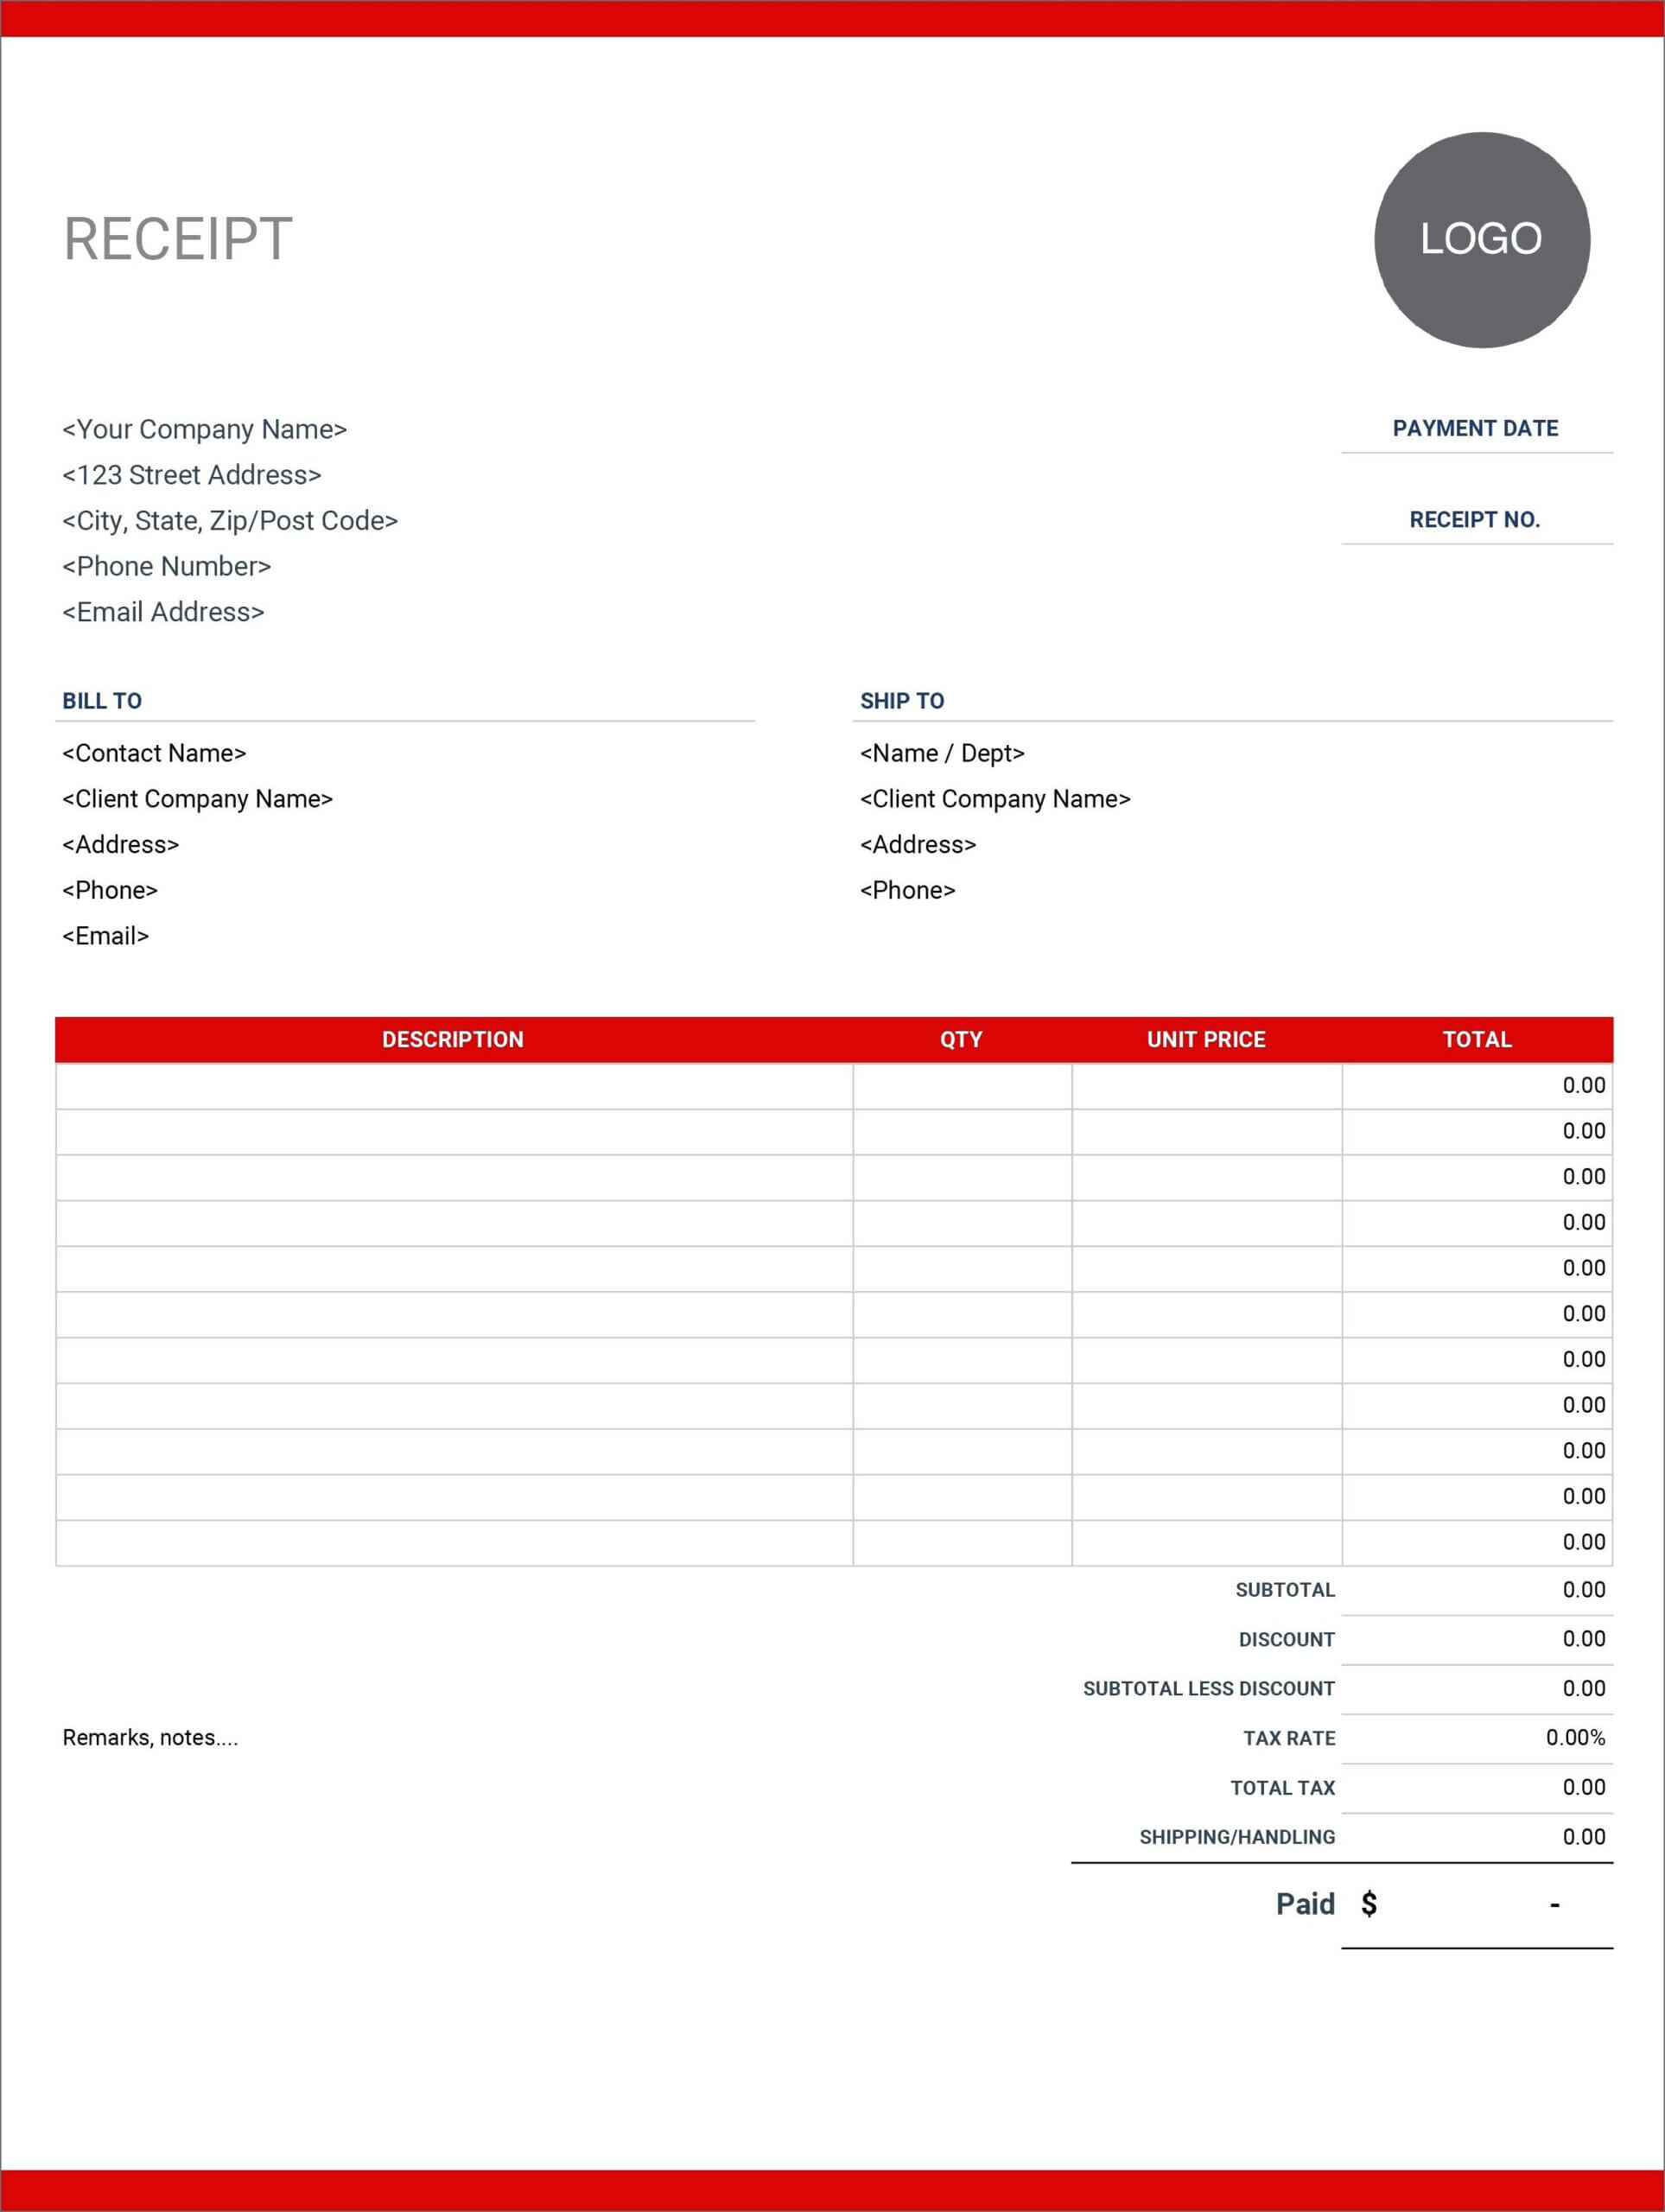 Credit Card Receipt Template Word – Vmarques Intended For Credit Card Receipt Template